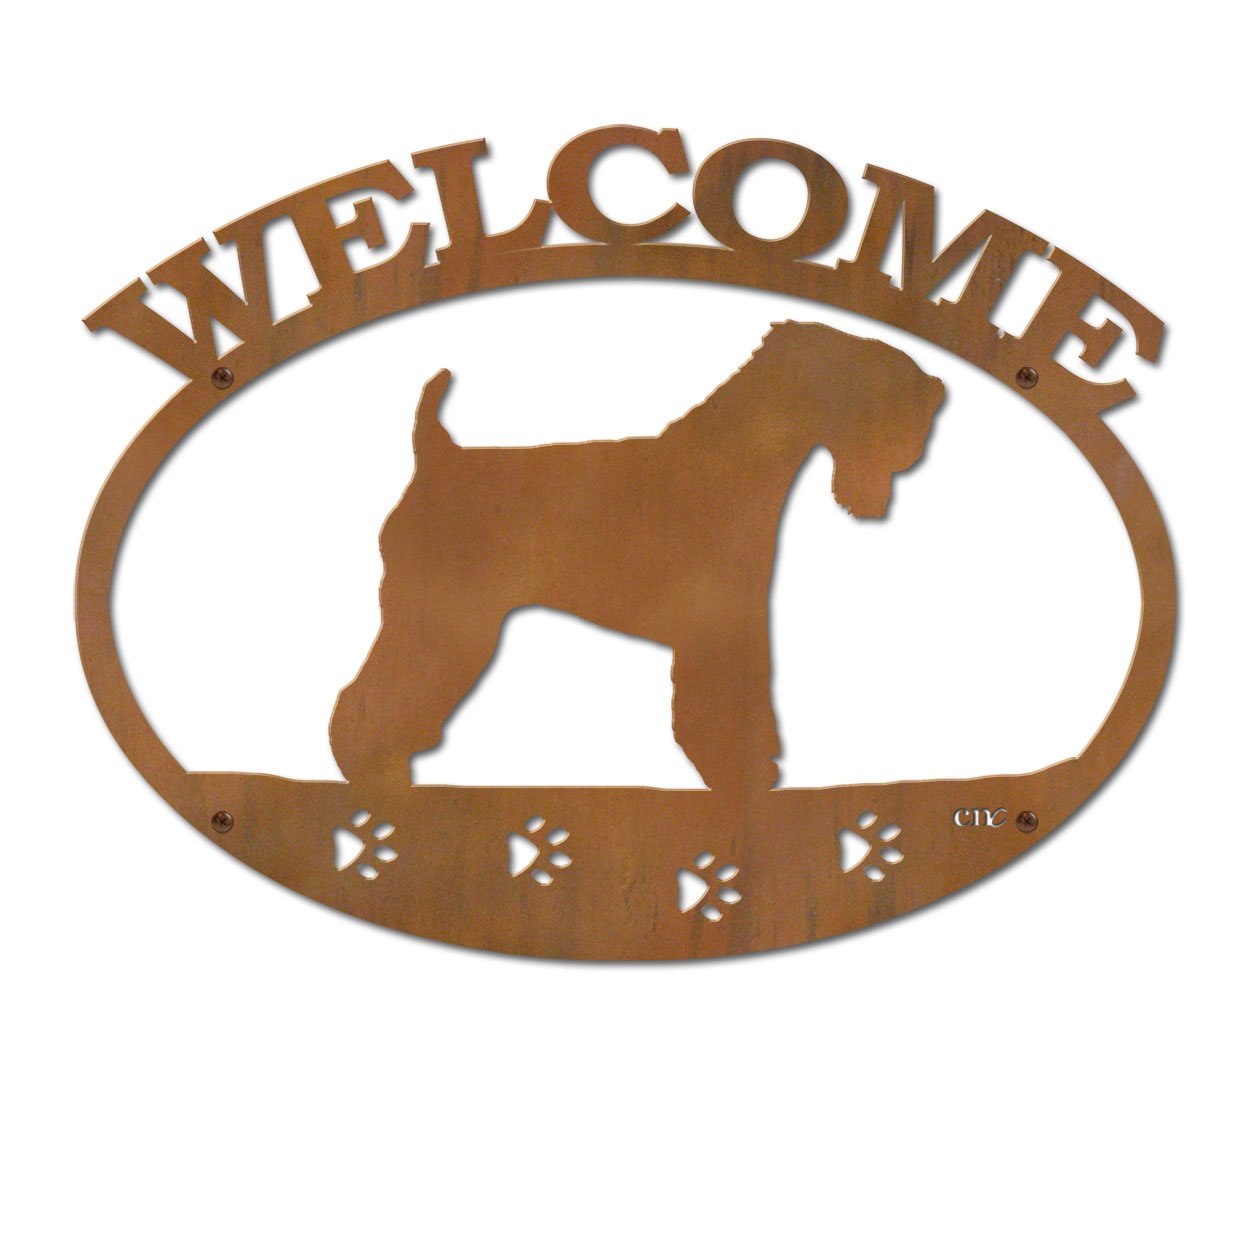 601262 - Soft Coated Wheaton Terrier Metal Welcome Sign